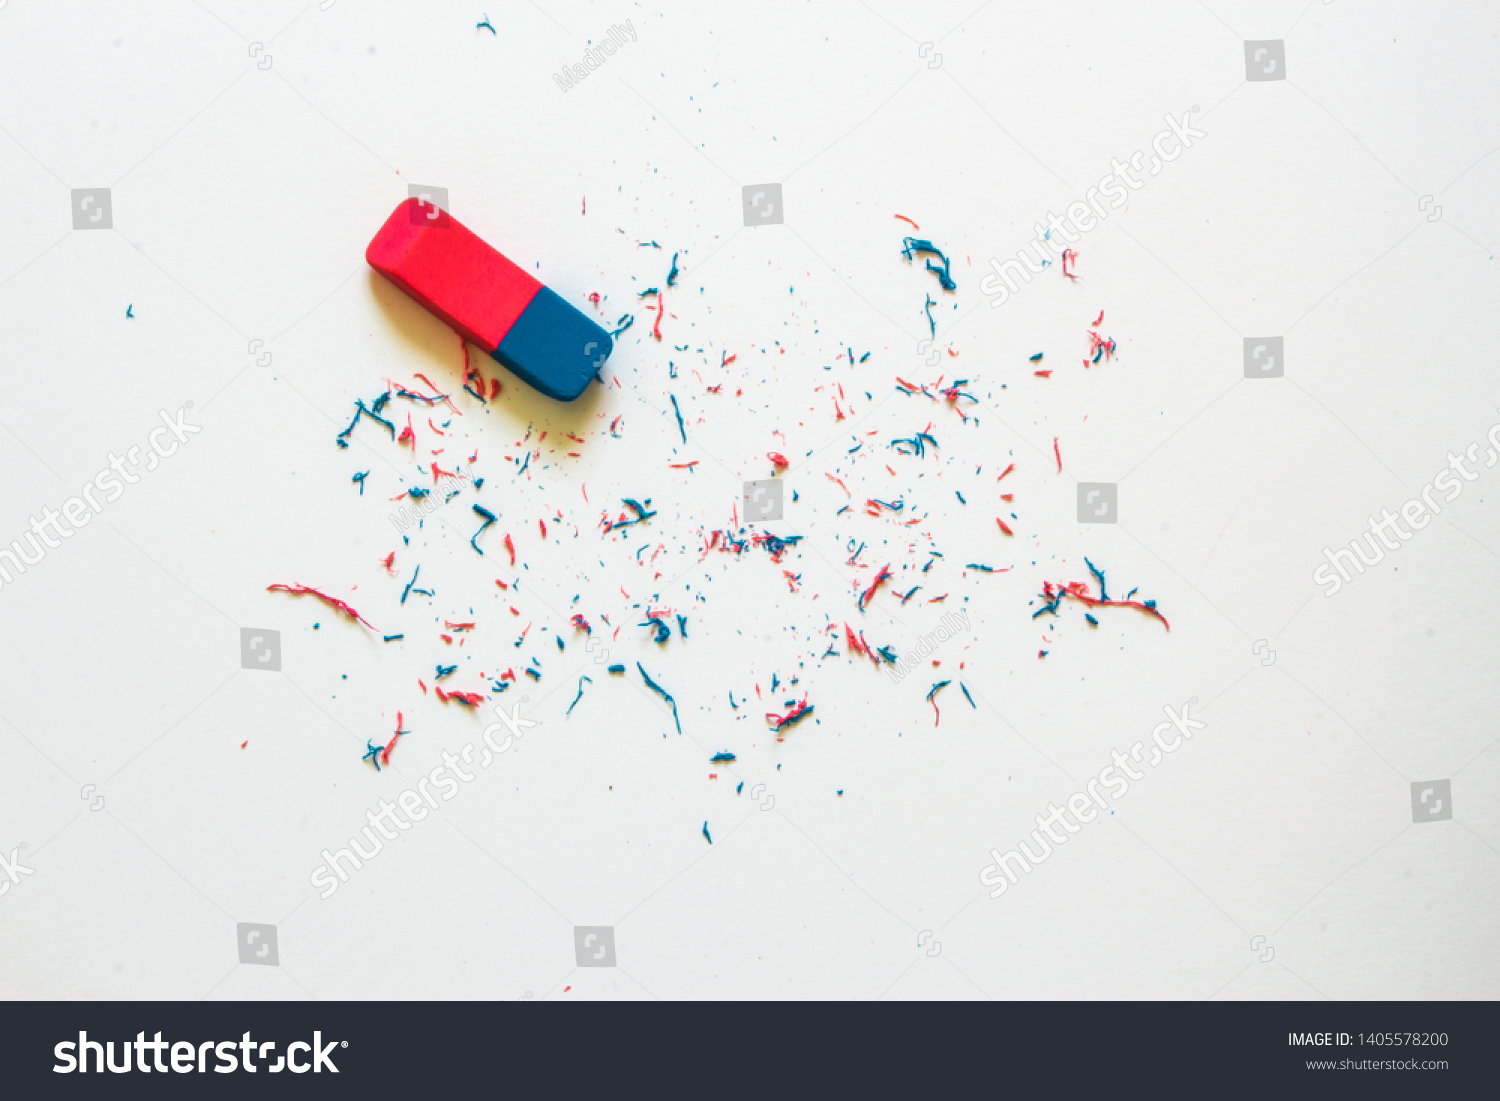 Pink and blue eraser and it’s shavings sitting on a clean white sheet of paper with copy space – Small office supply for correcting errors – Concept image for erasing mistakes and editing #1405578200